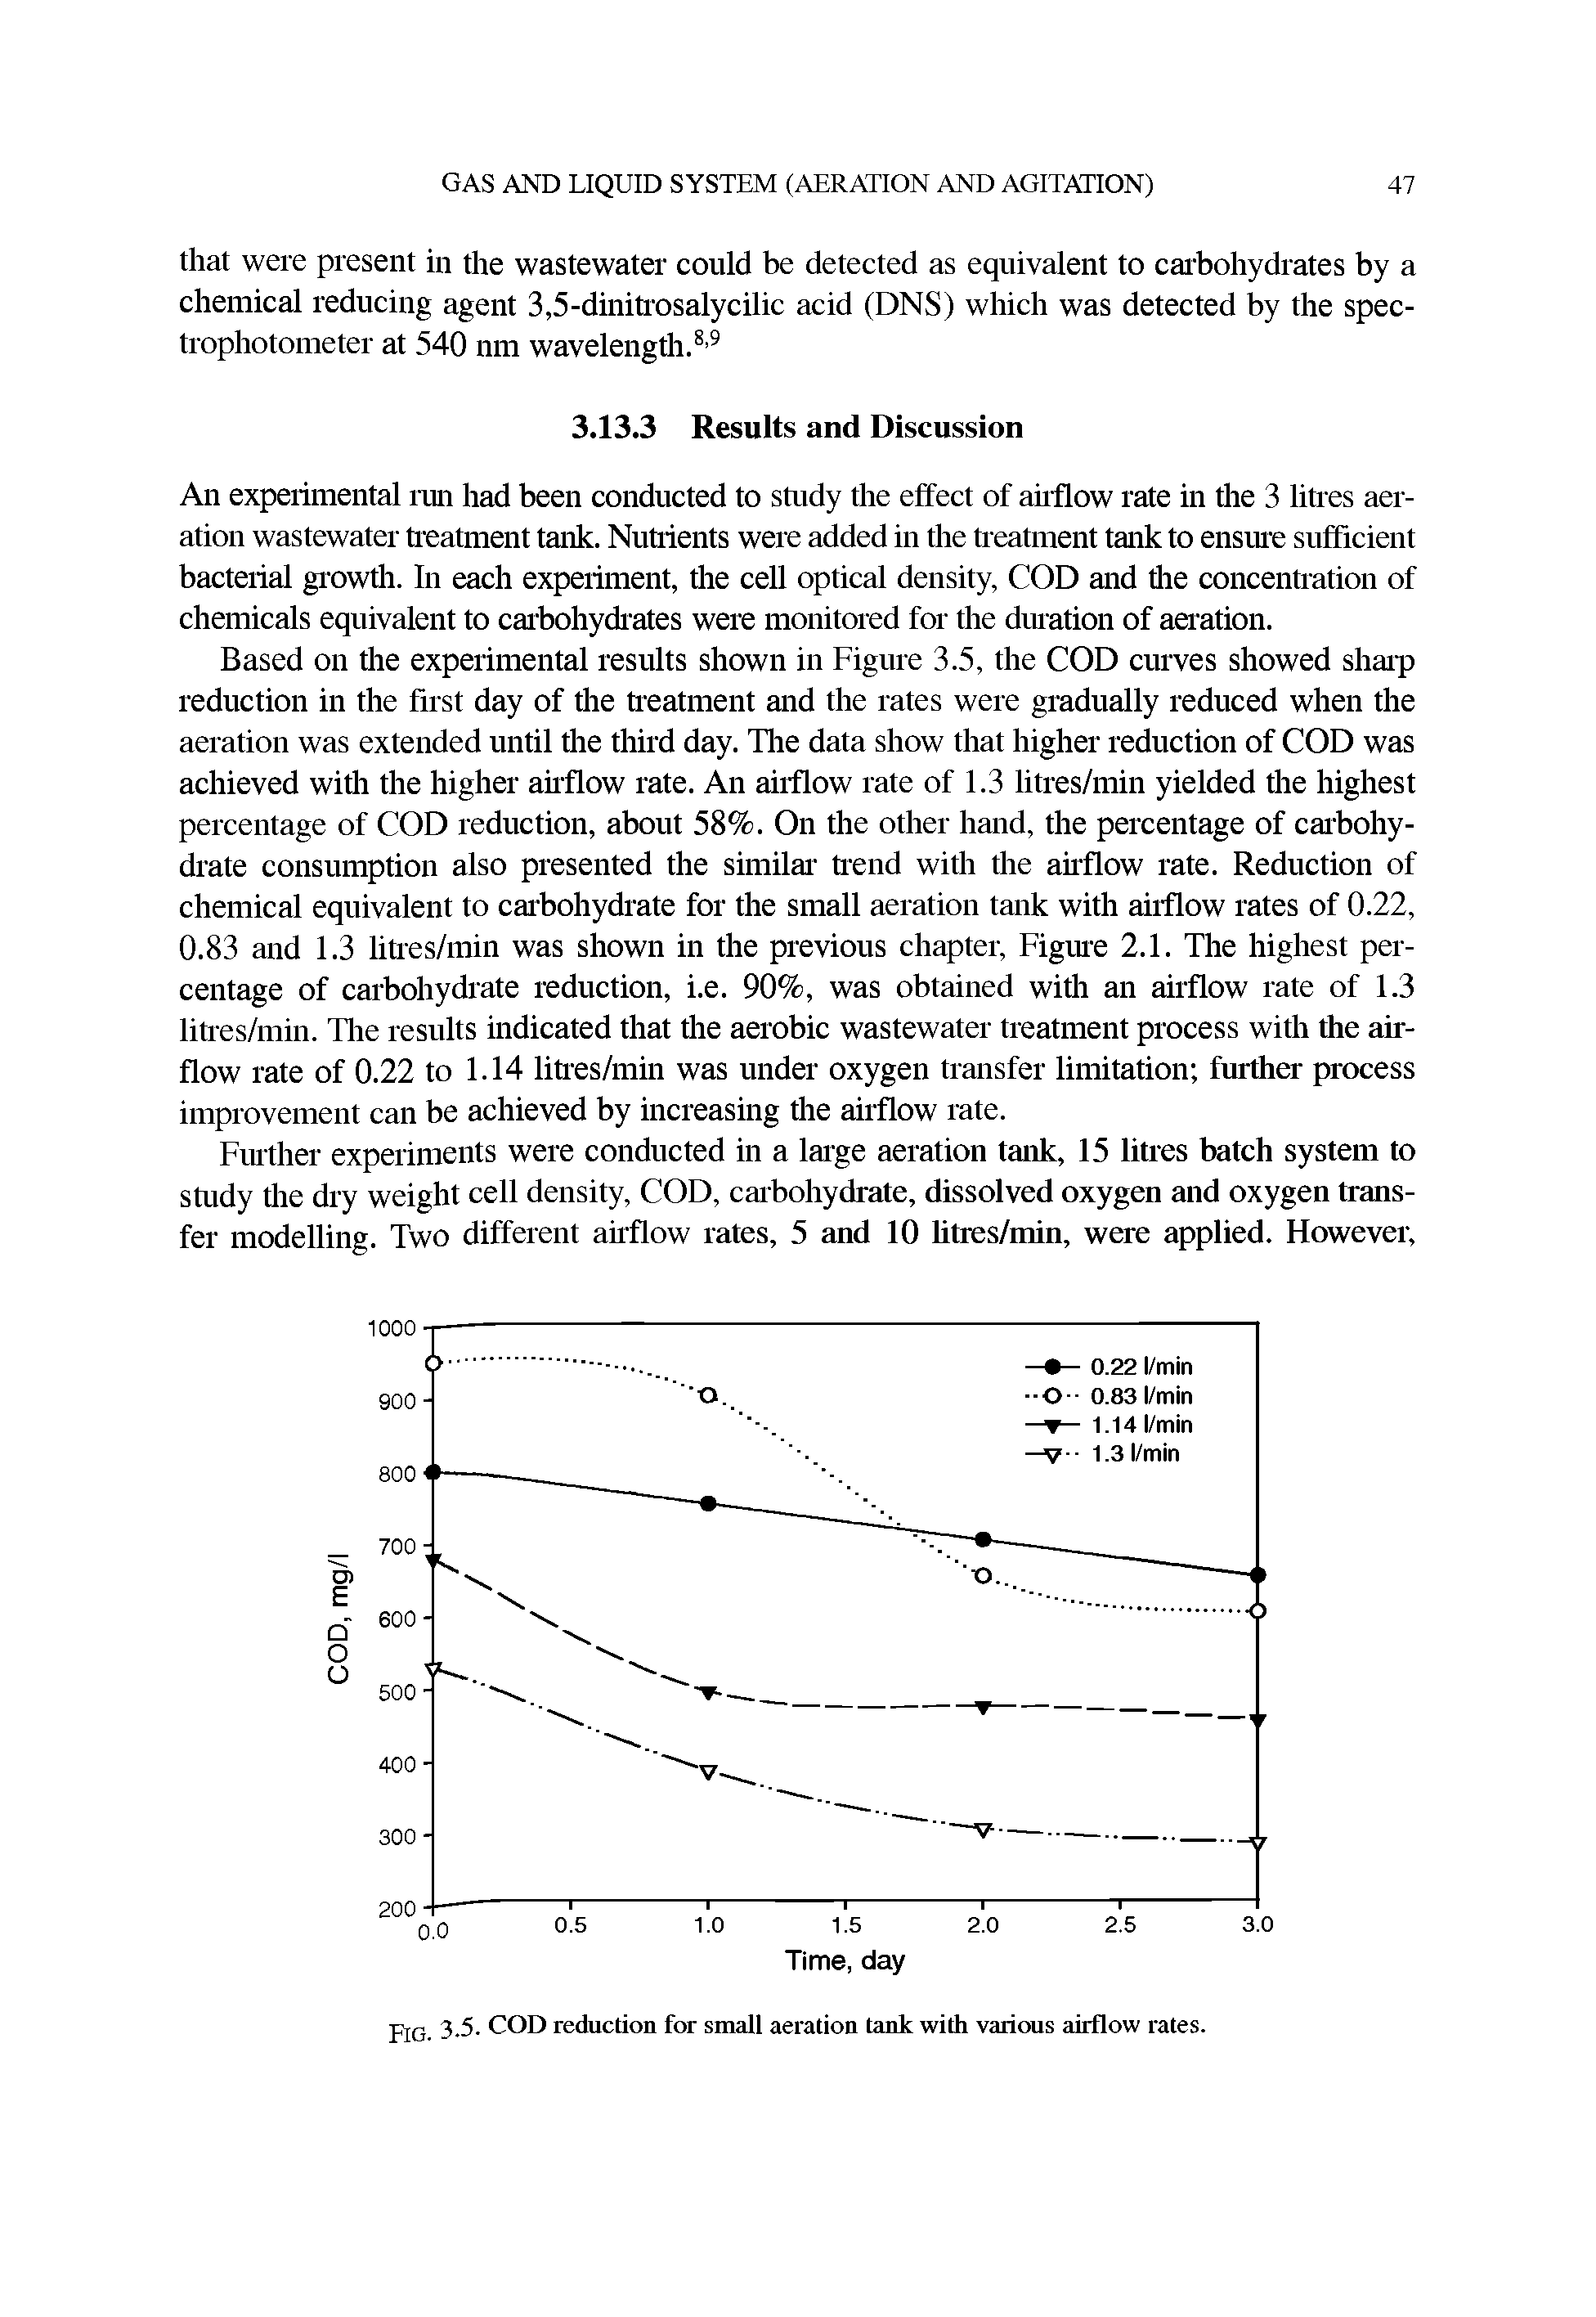 Fig. 3.5. COD reduction for small aeration tank with various airflow rates.